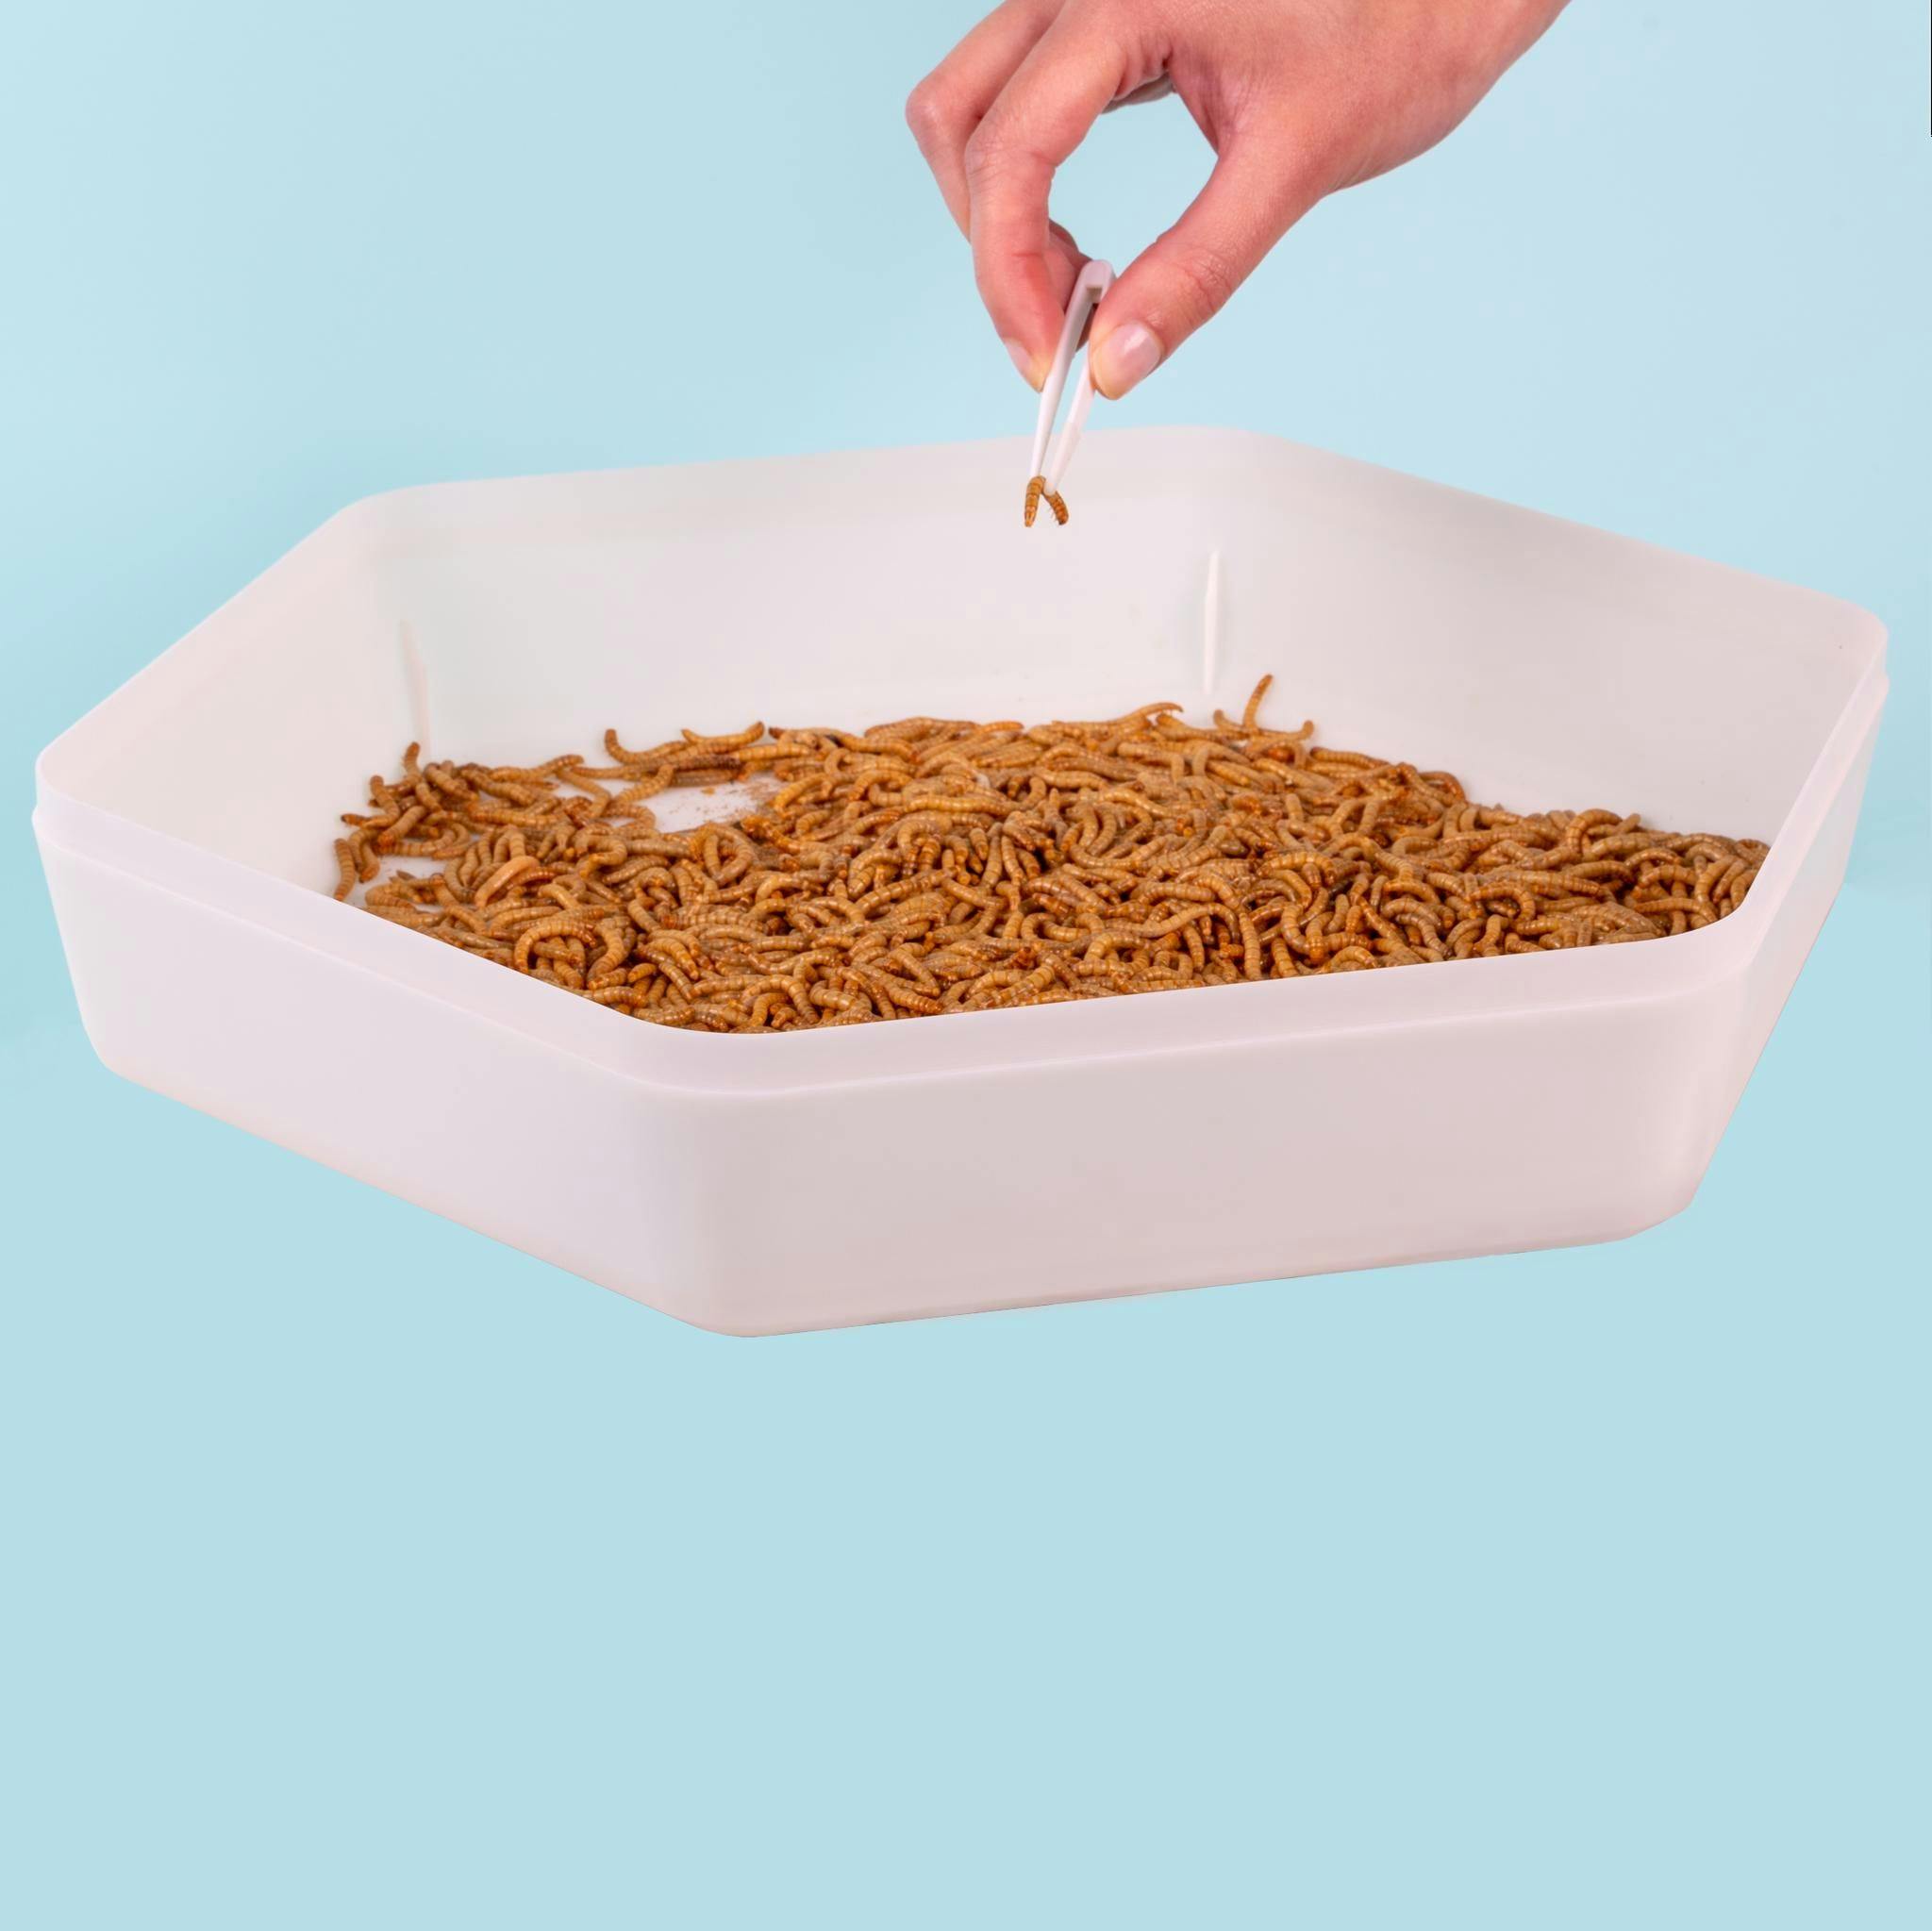 Image for Mealworm Storage Tray (Beetle Tray Not Included) by The Bug Factory